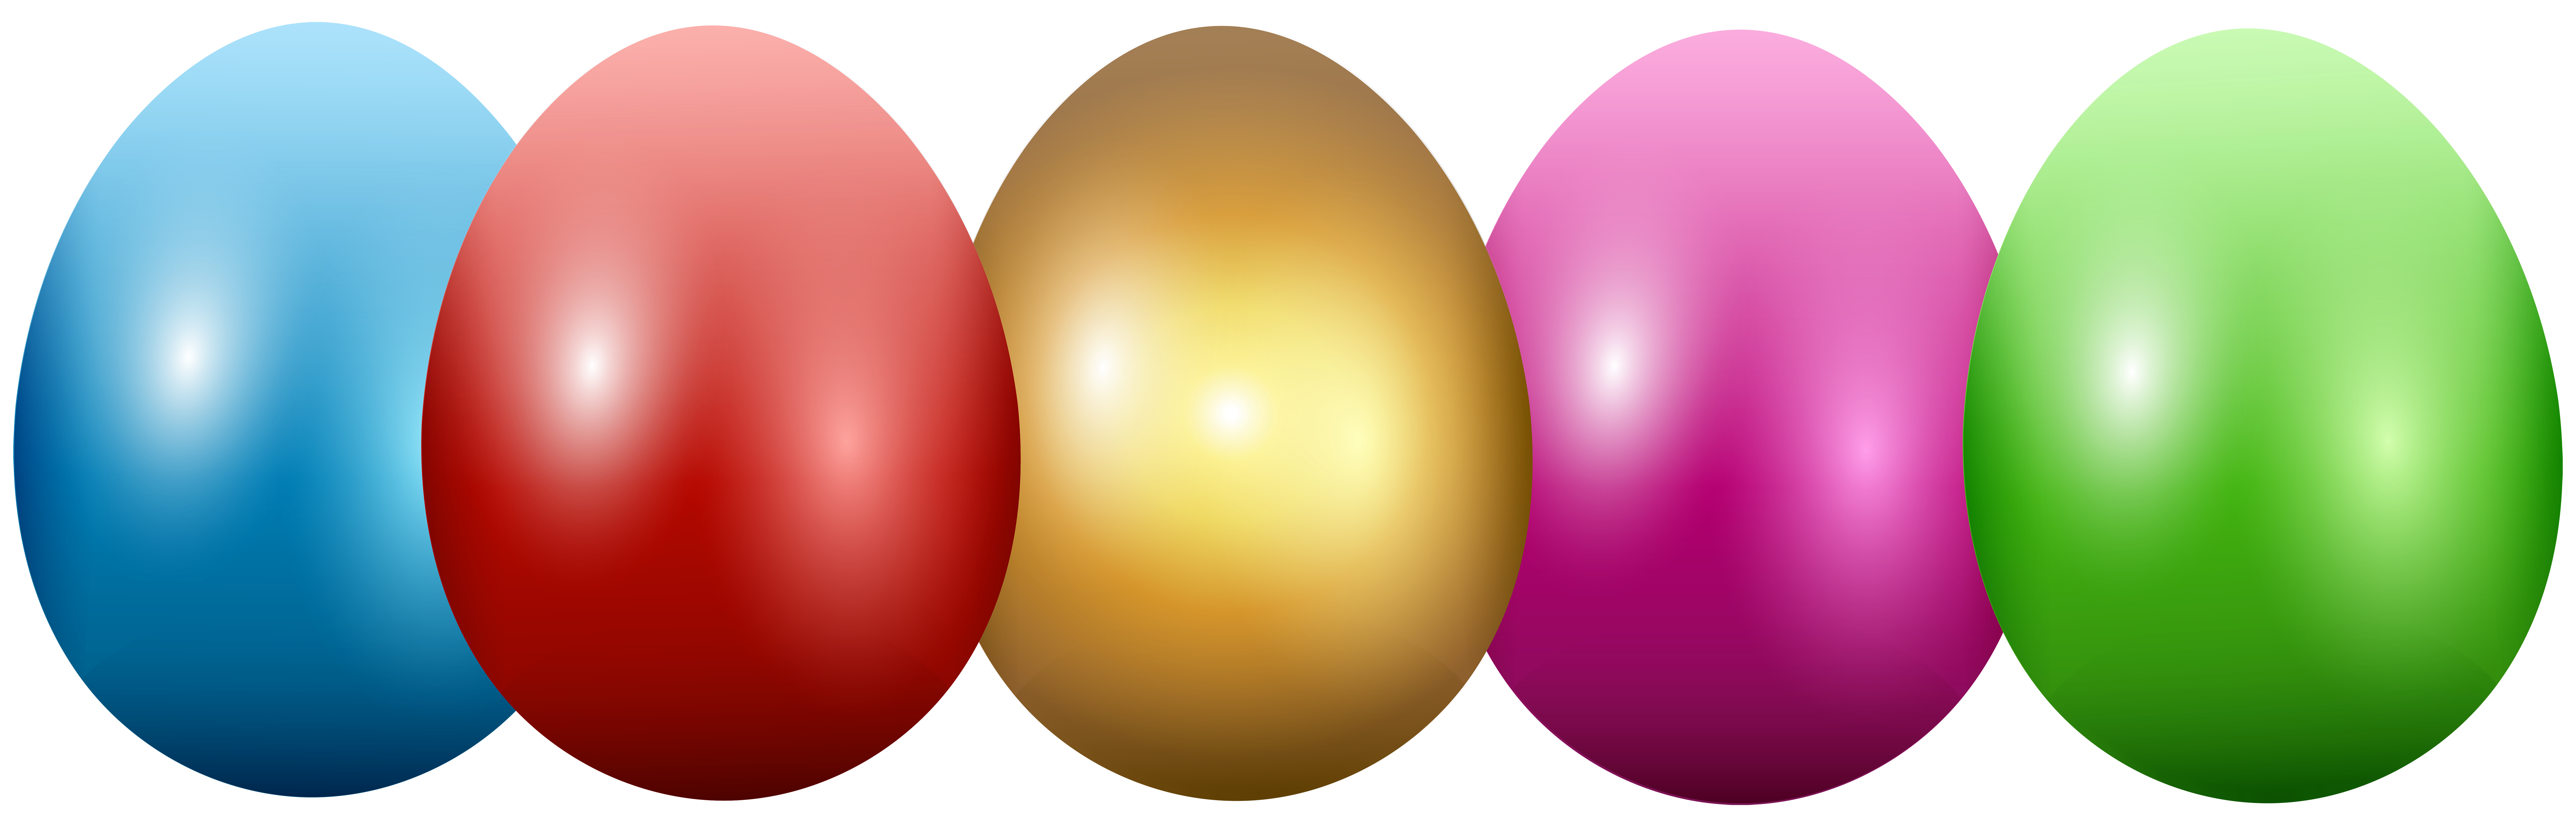 Colorful eggs PNG image transparent image download, size: 2663x2430px